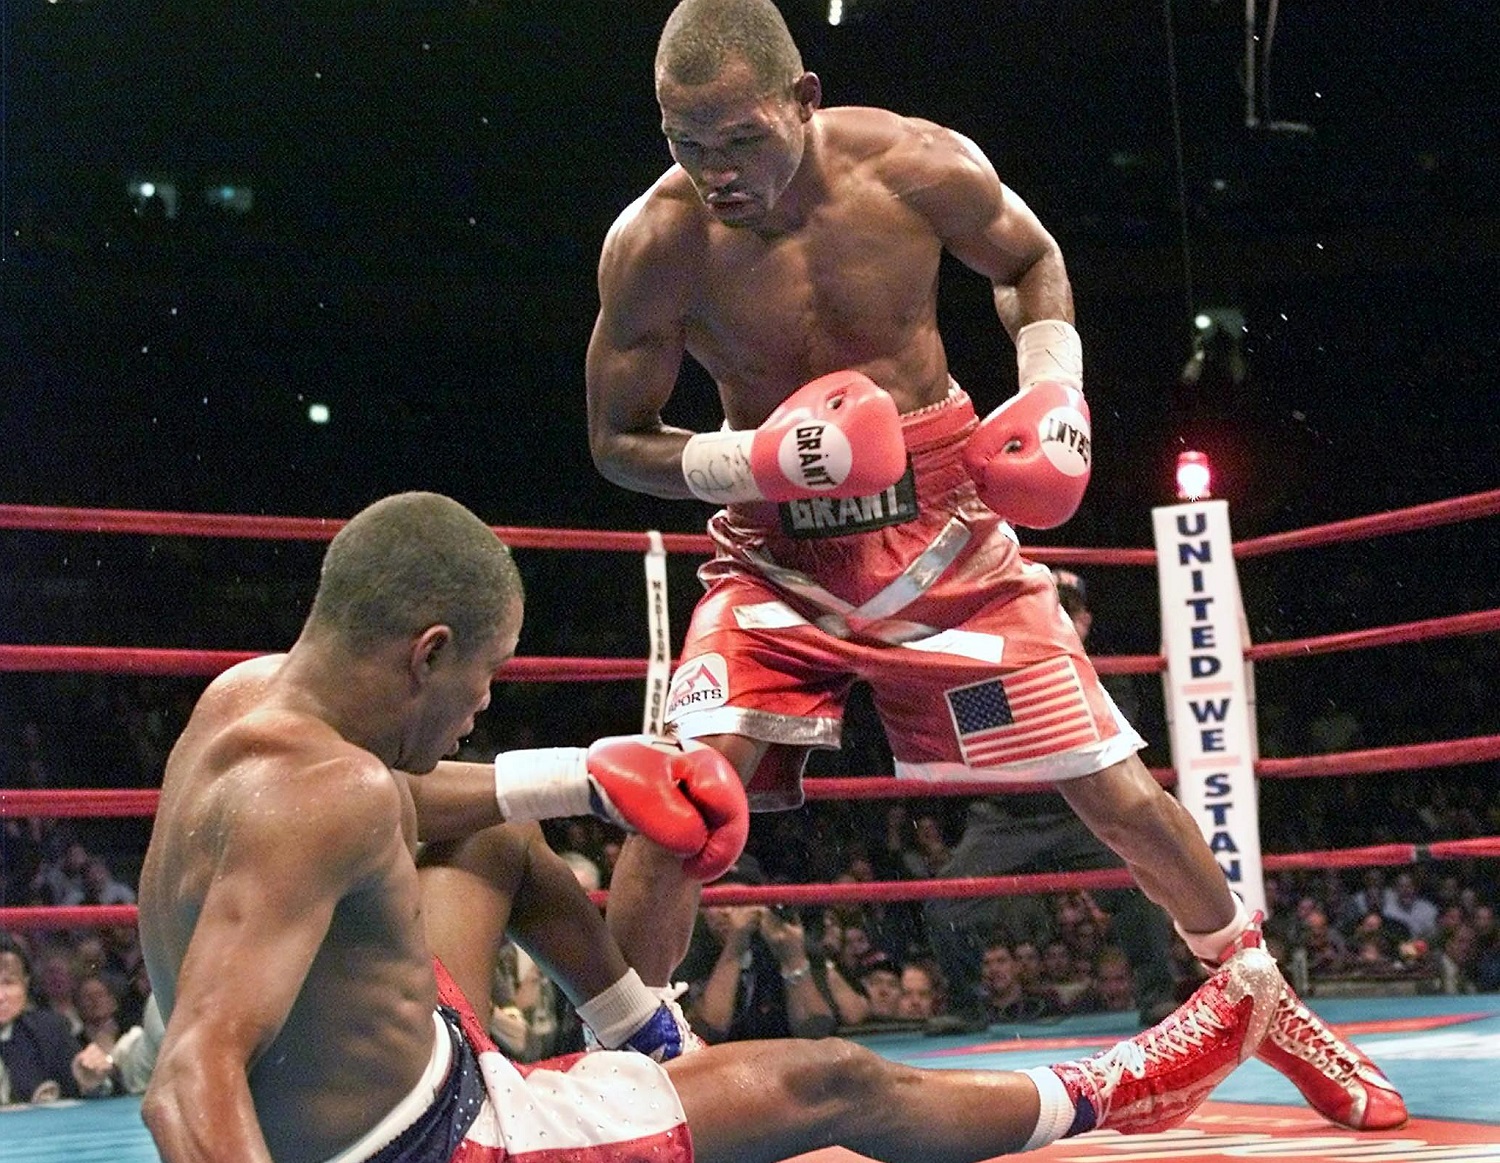 Bernard Hopkins, right, knocks down Felix Trinidad during their title unification match at Madison Square Garden on Sept. 29, 2001. Hopkins won by TKO in the 12th round to secure the undisputed middleweight championship. | Timothy A. Clary/AFP via Getty Images